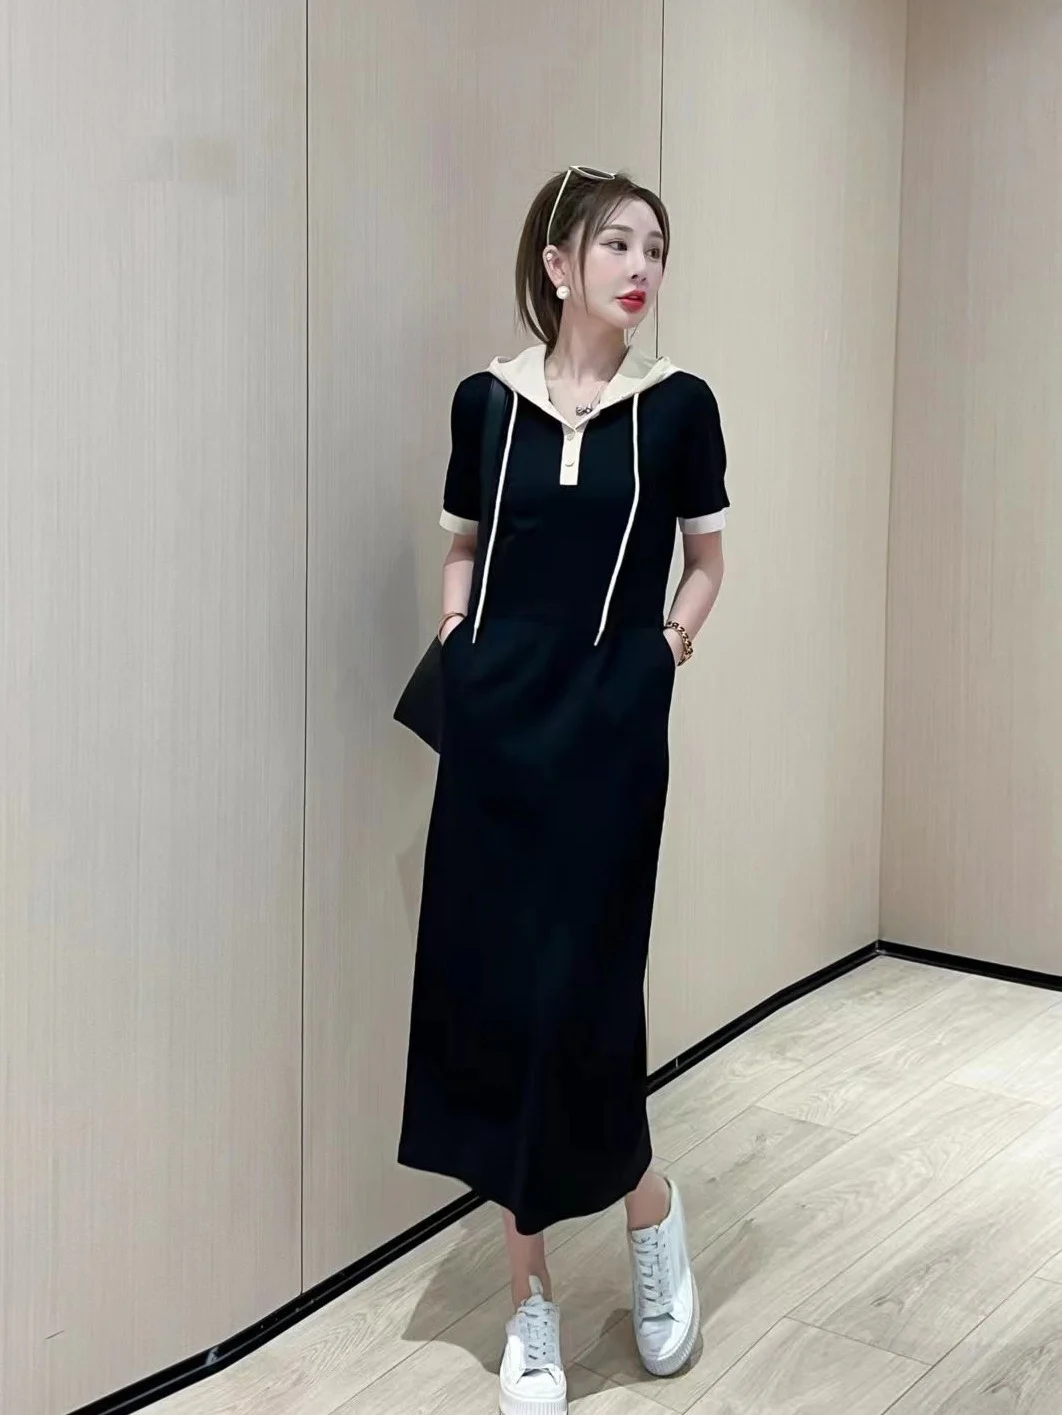 

2023 spring and summer women's clothing fashion new Short Sleeve Color Contrast Patchwork Cap Waistline Thread Dress 0428